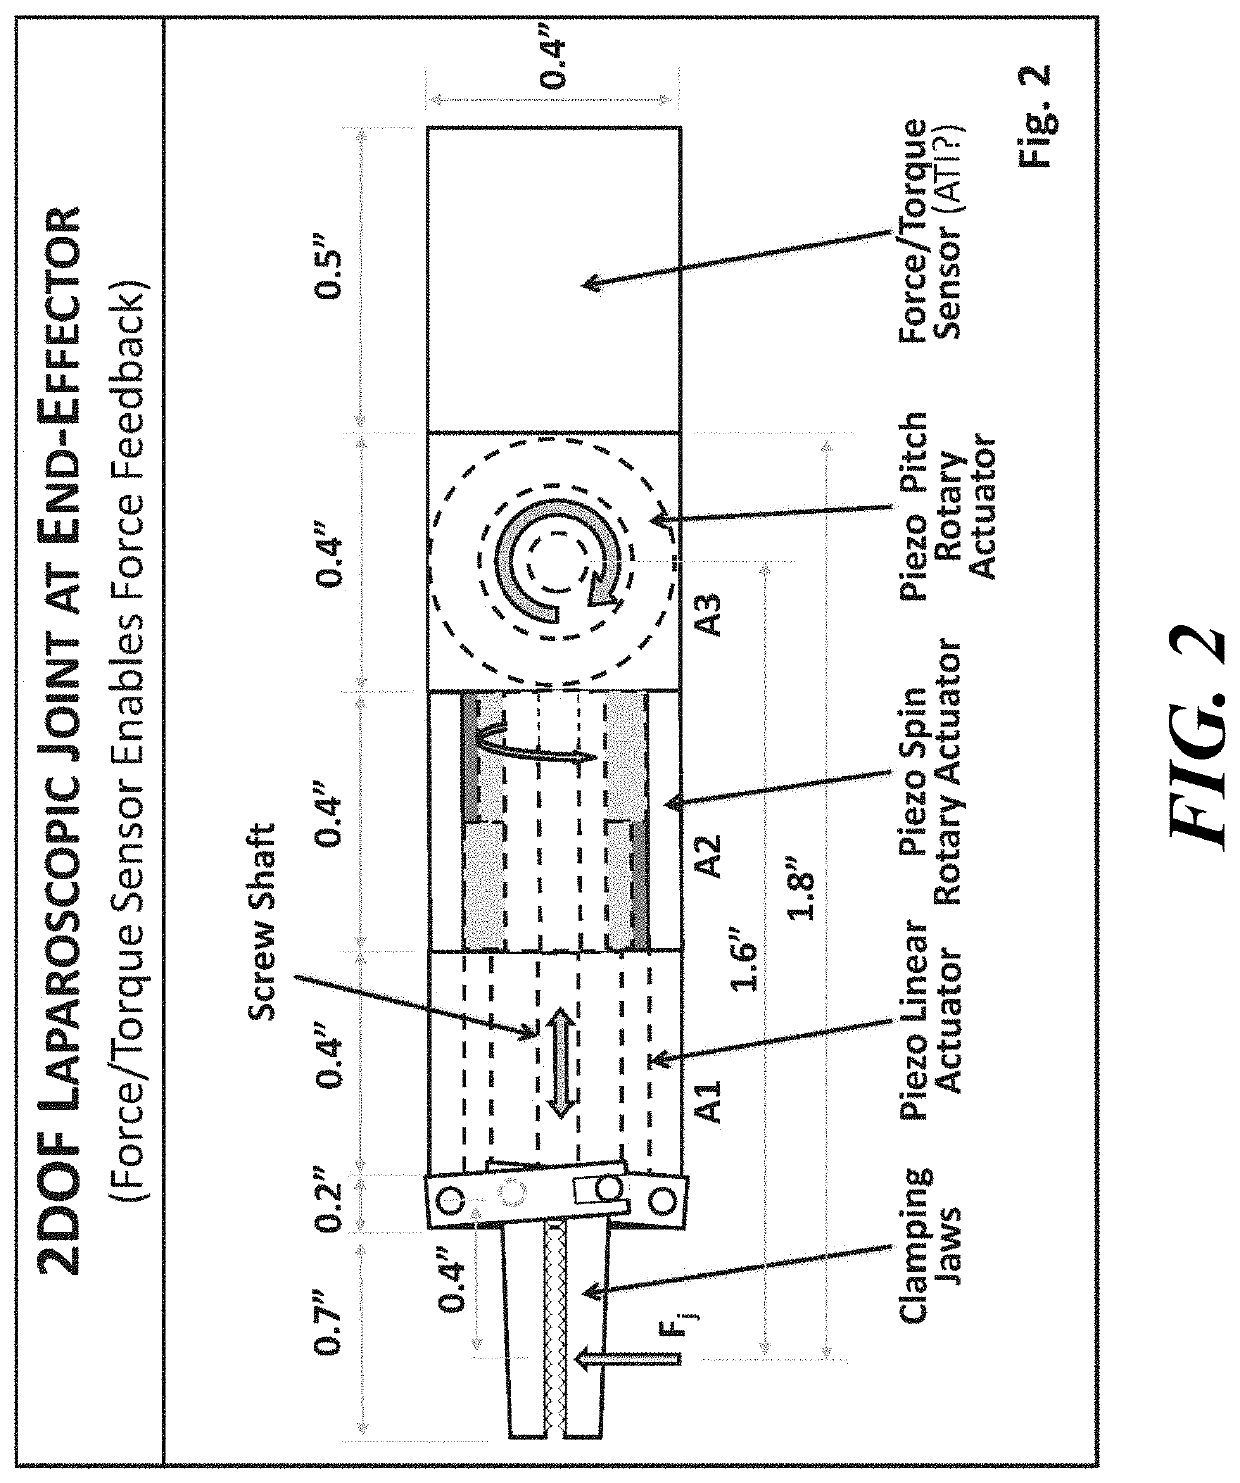 Actuator with a parallel eccentric gear train driven by a mechanically amplified piezoelectric assembly